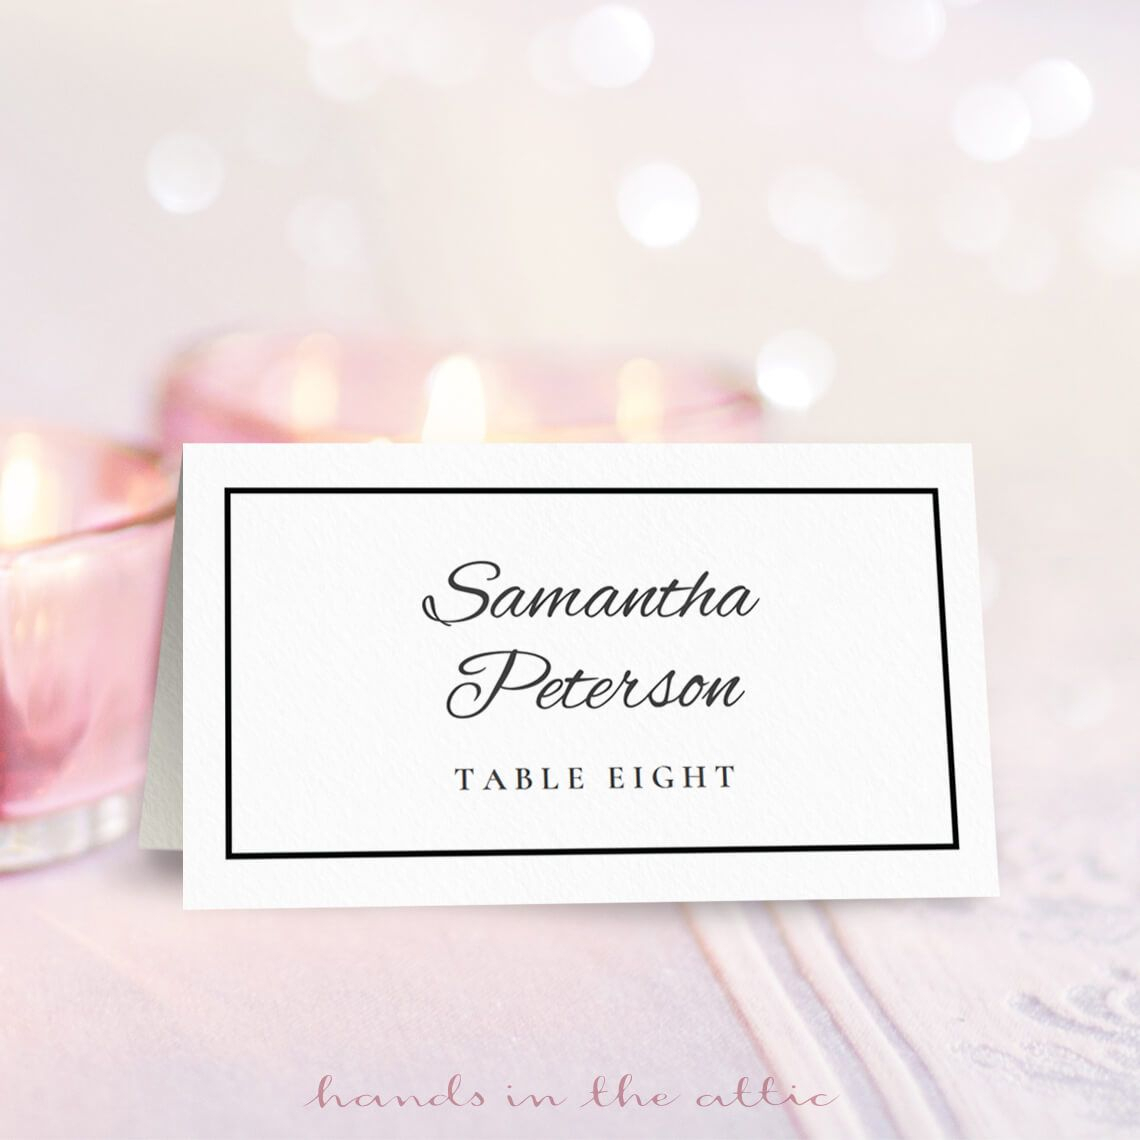 Wedding Place Card Template | Printable Place Cards, Place Regarding Table Place Card Template Free Download